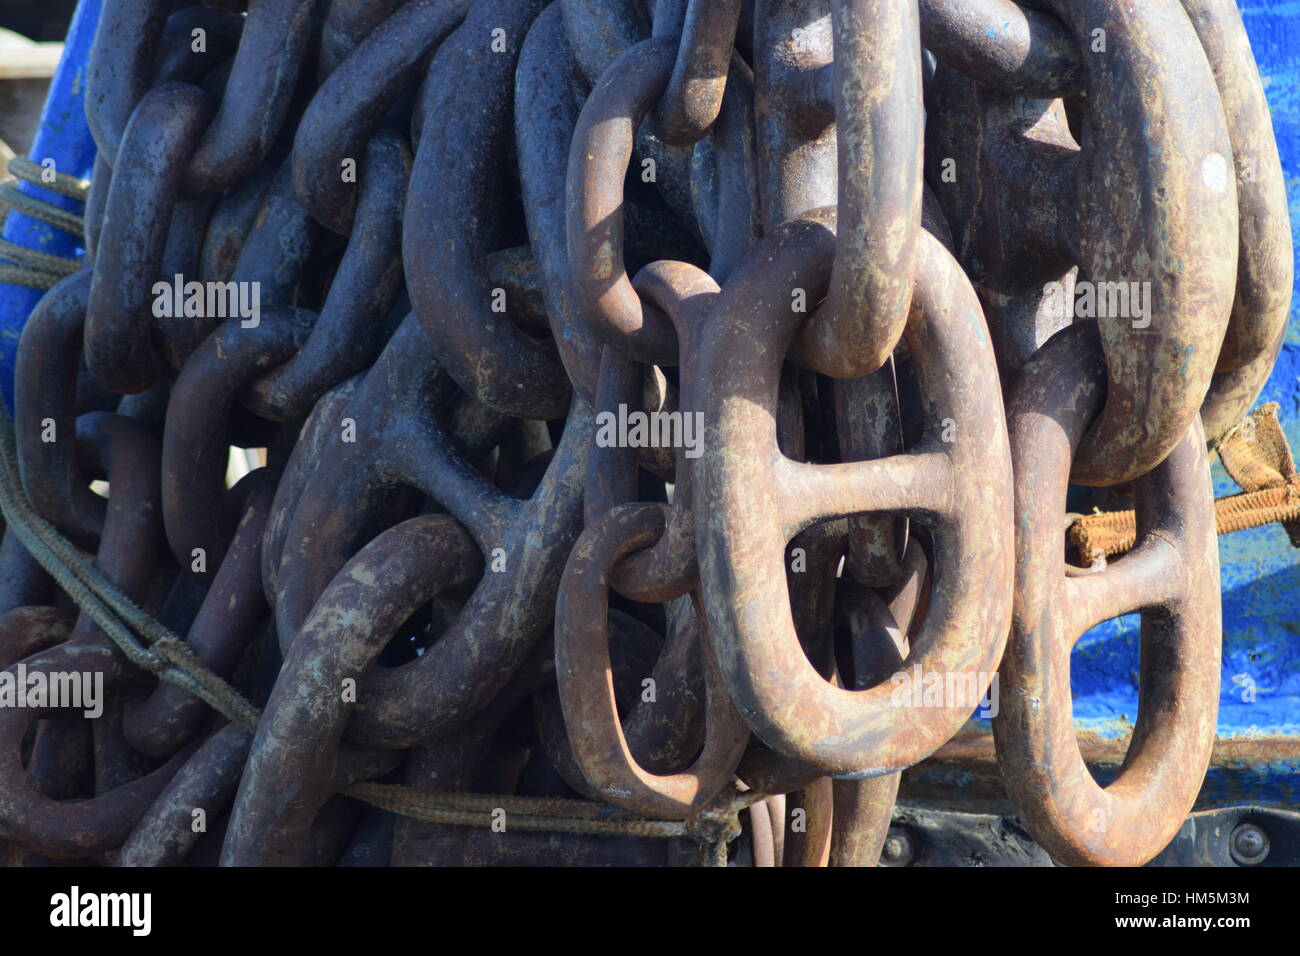 Rusty anchor chains on fishing boat Stock Photo